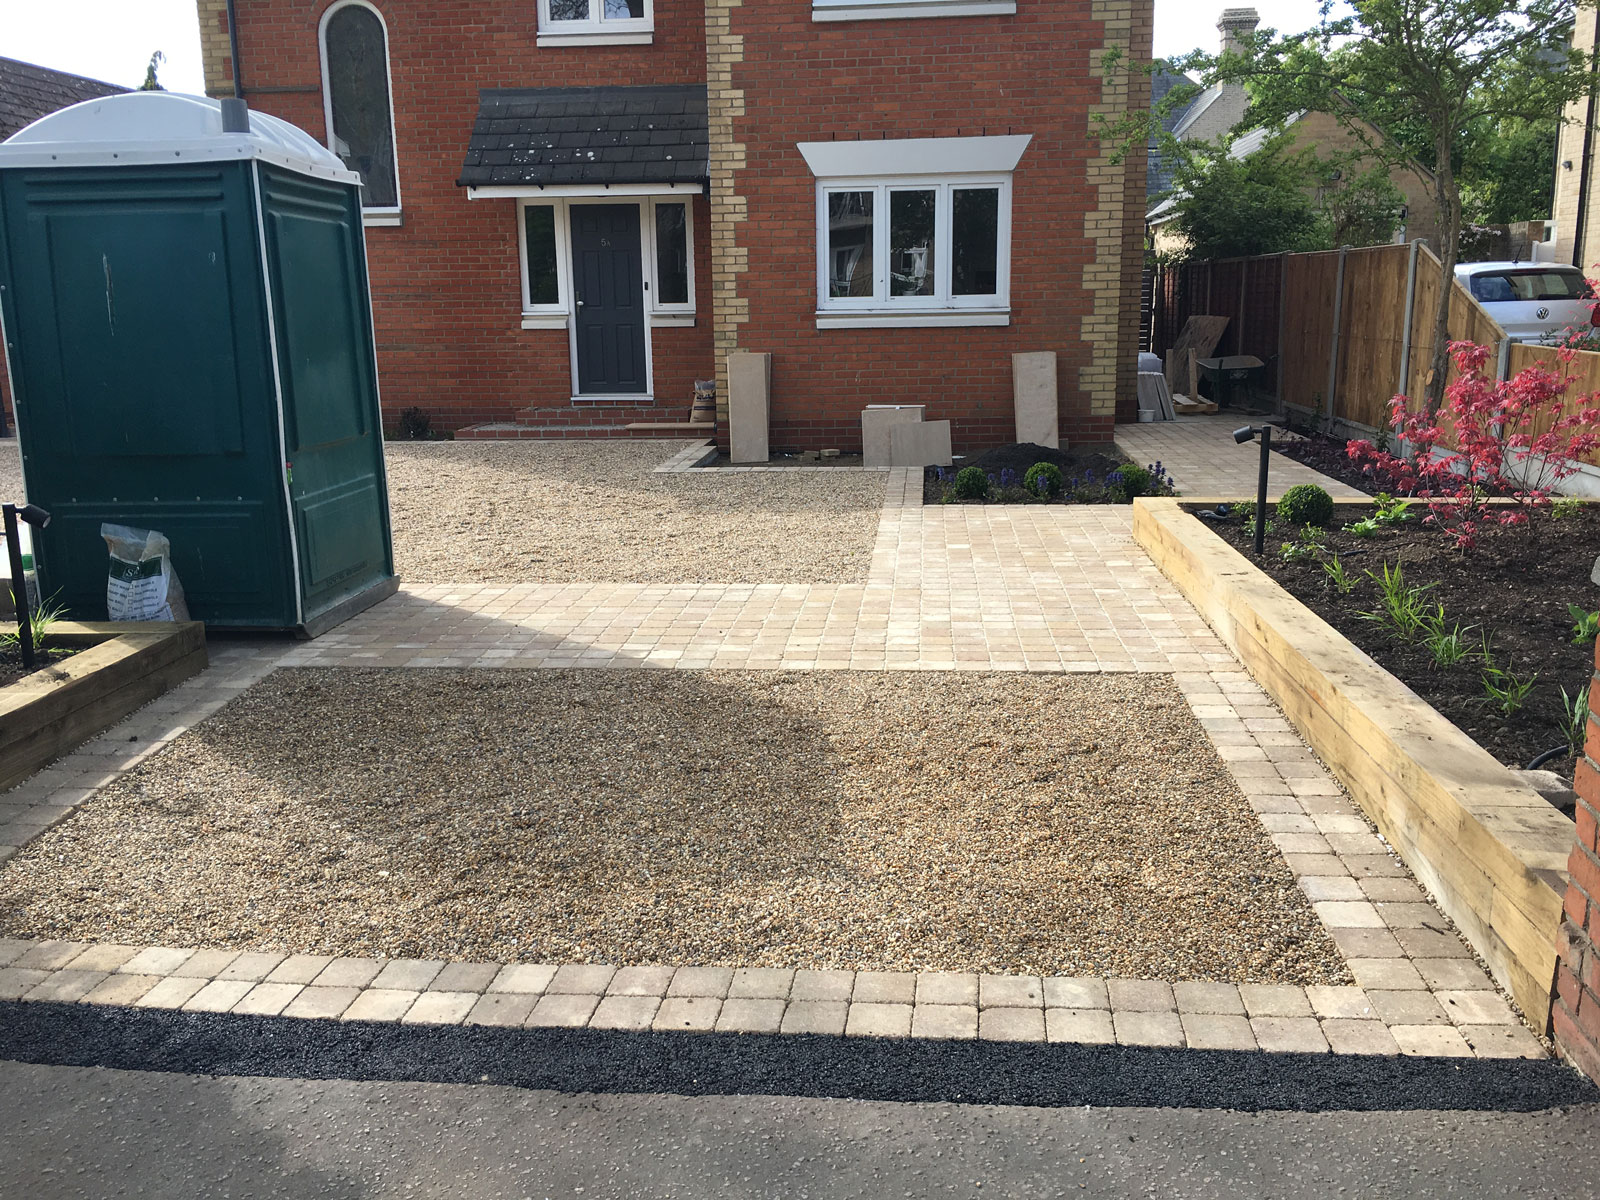 Front driveway design with gravel surfacing alternating with paved paths and decorative features